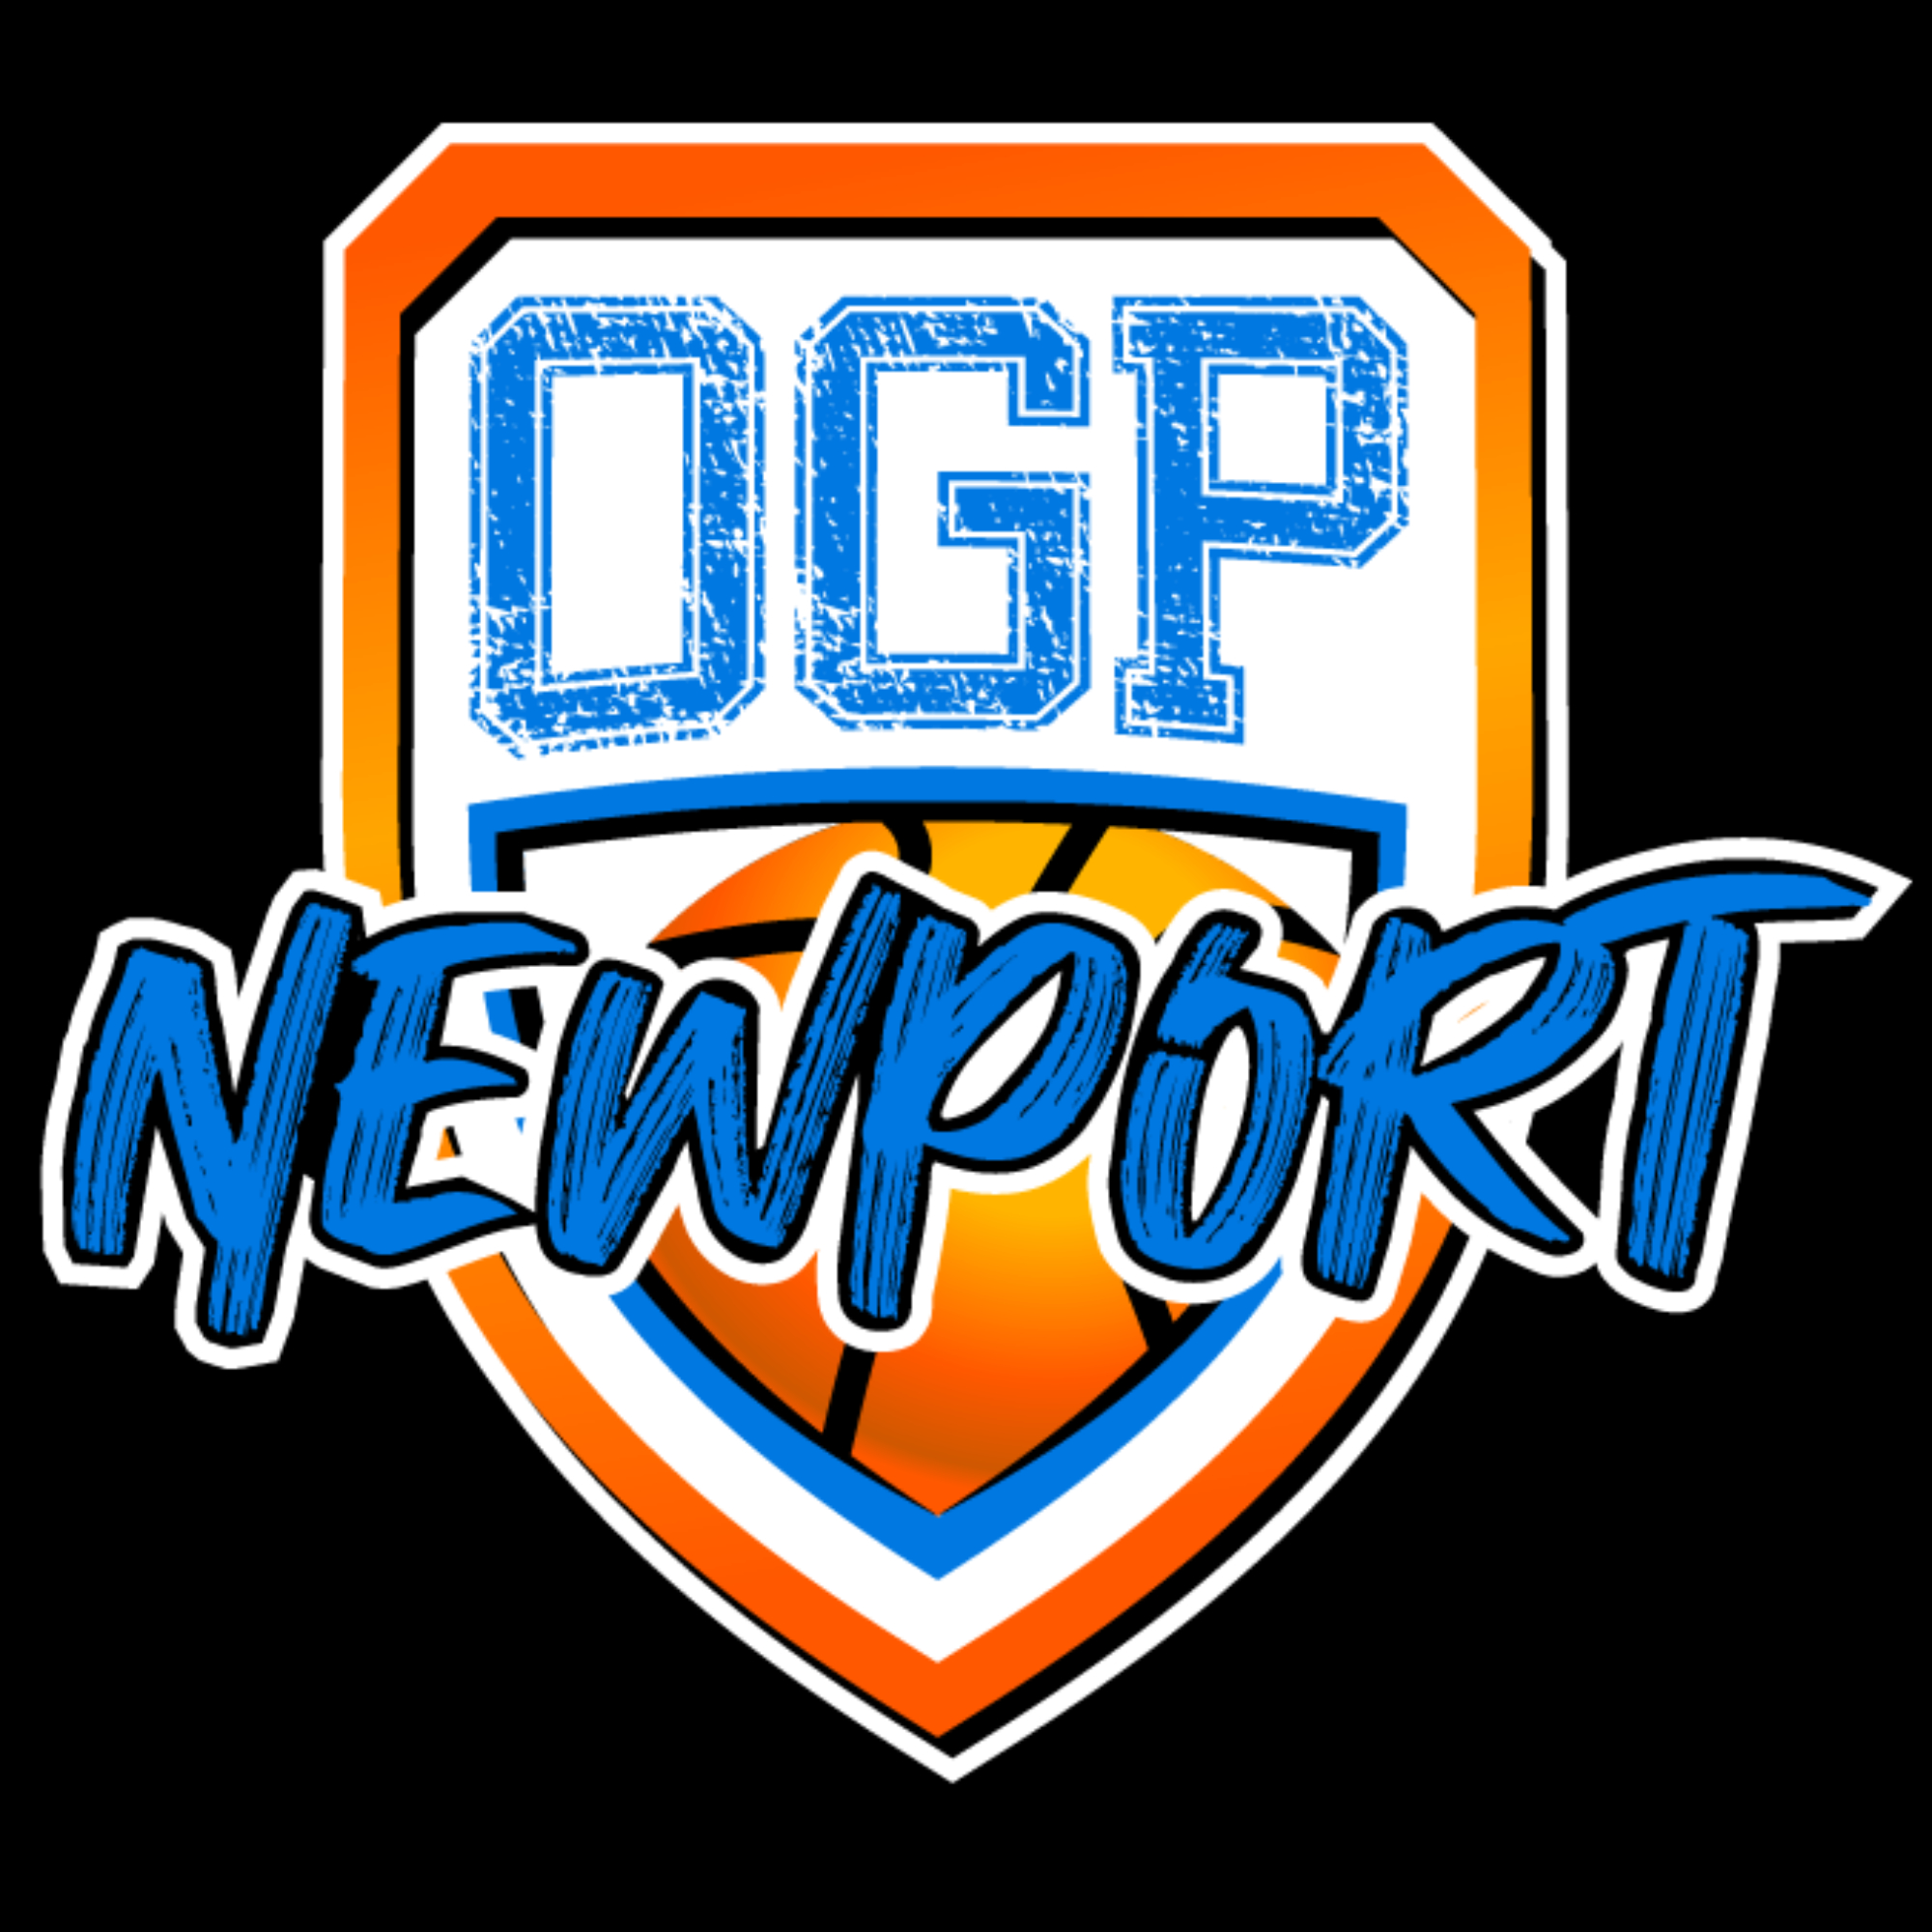 The official logo of Open Gym Premier